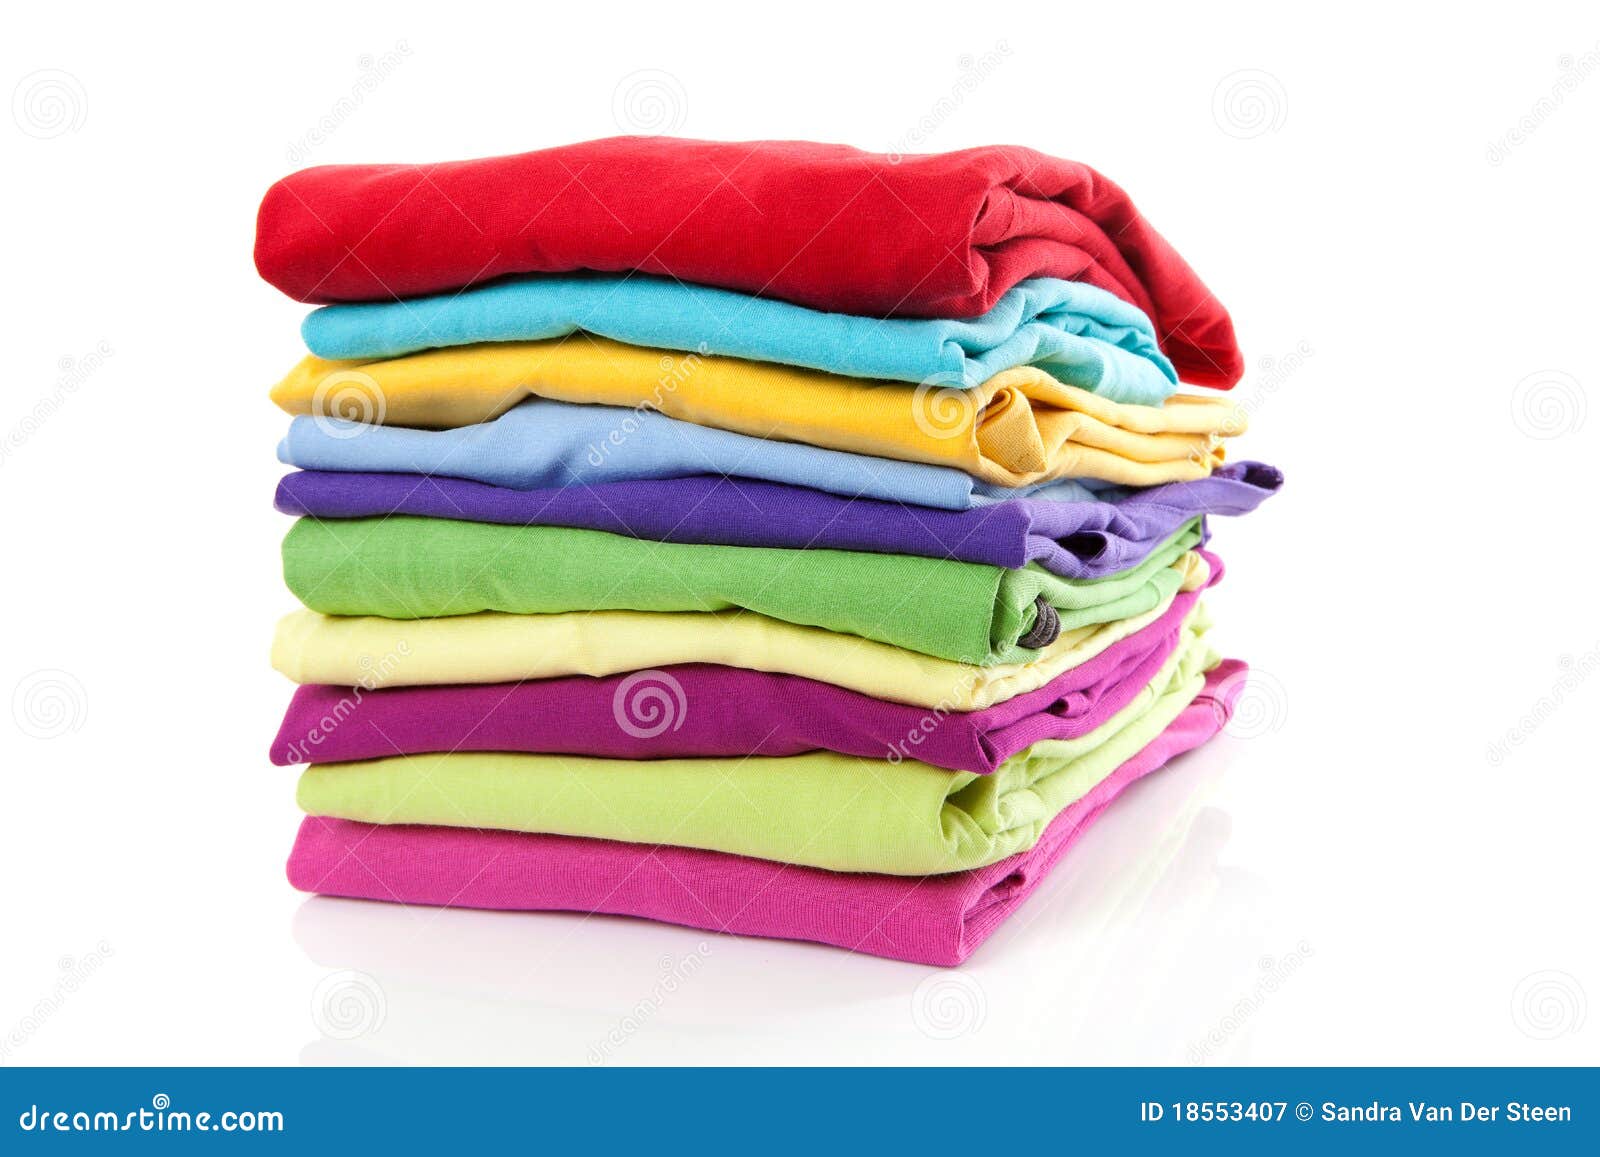 Pile of colorful clothes stock image. Image of laundry - 18553407